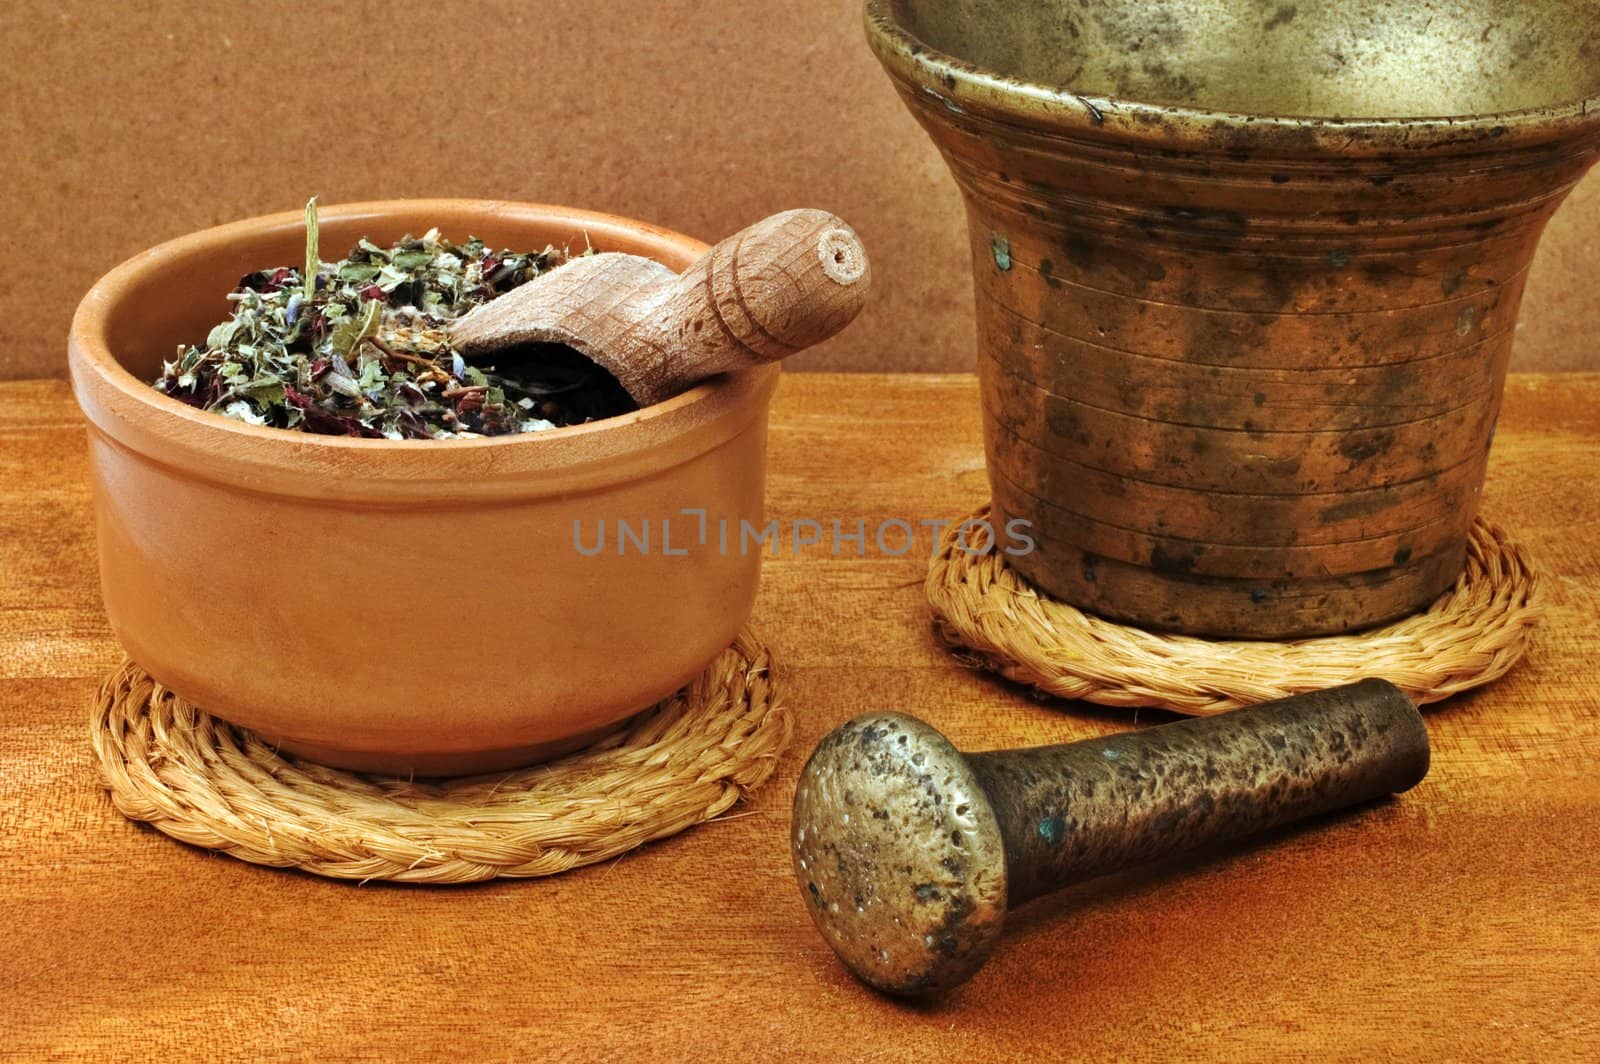 Mortar and pestle with herbs by sil